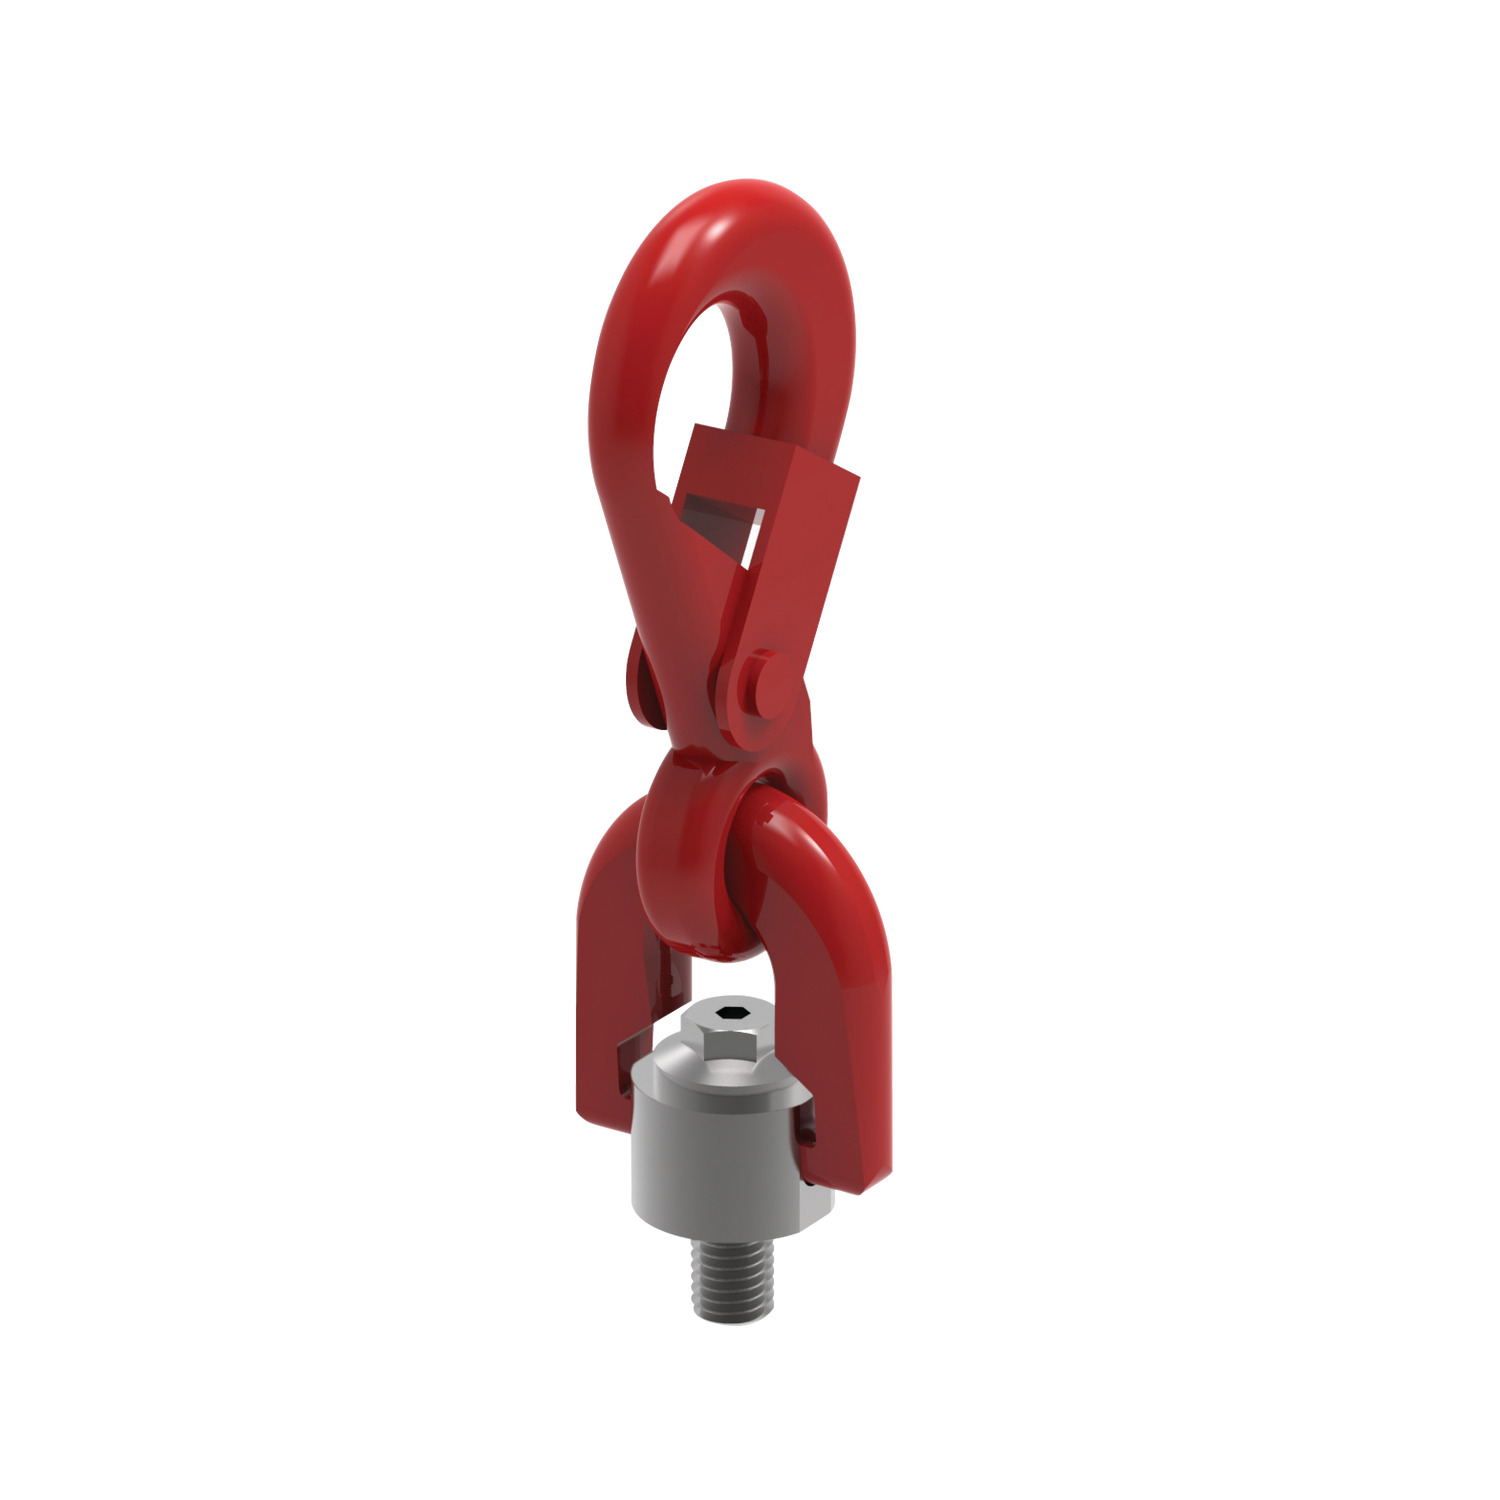 Double Swivel Hooks  Male Double swivel lifting shackles, loads up to 2.5 tons per ring.